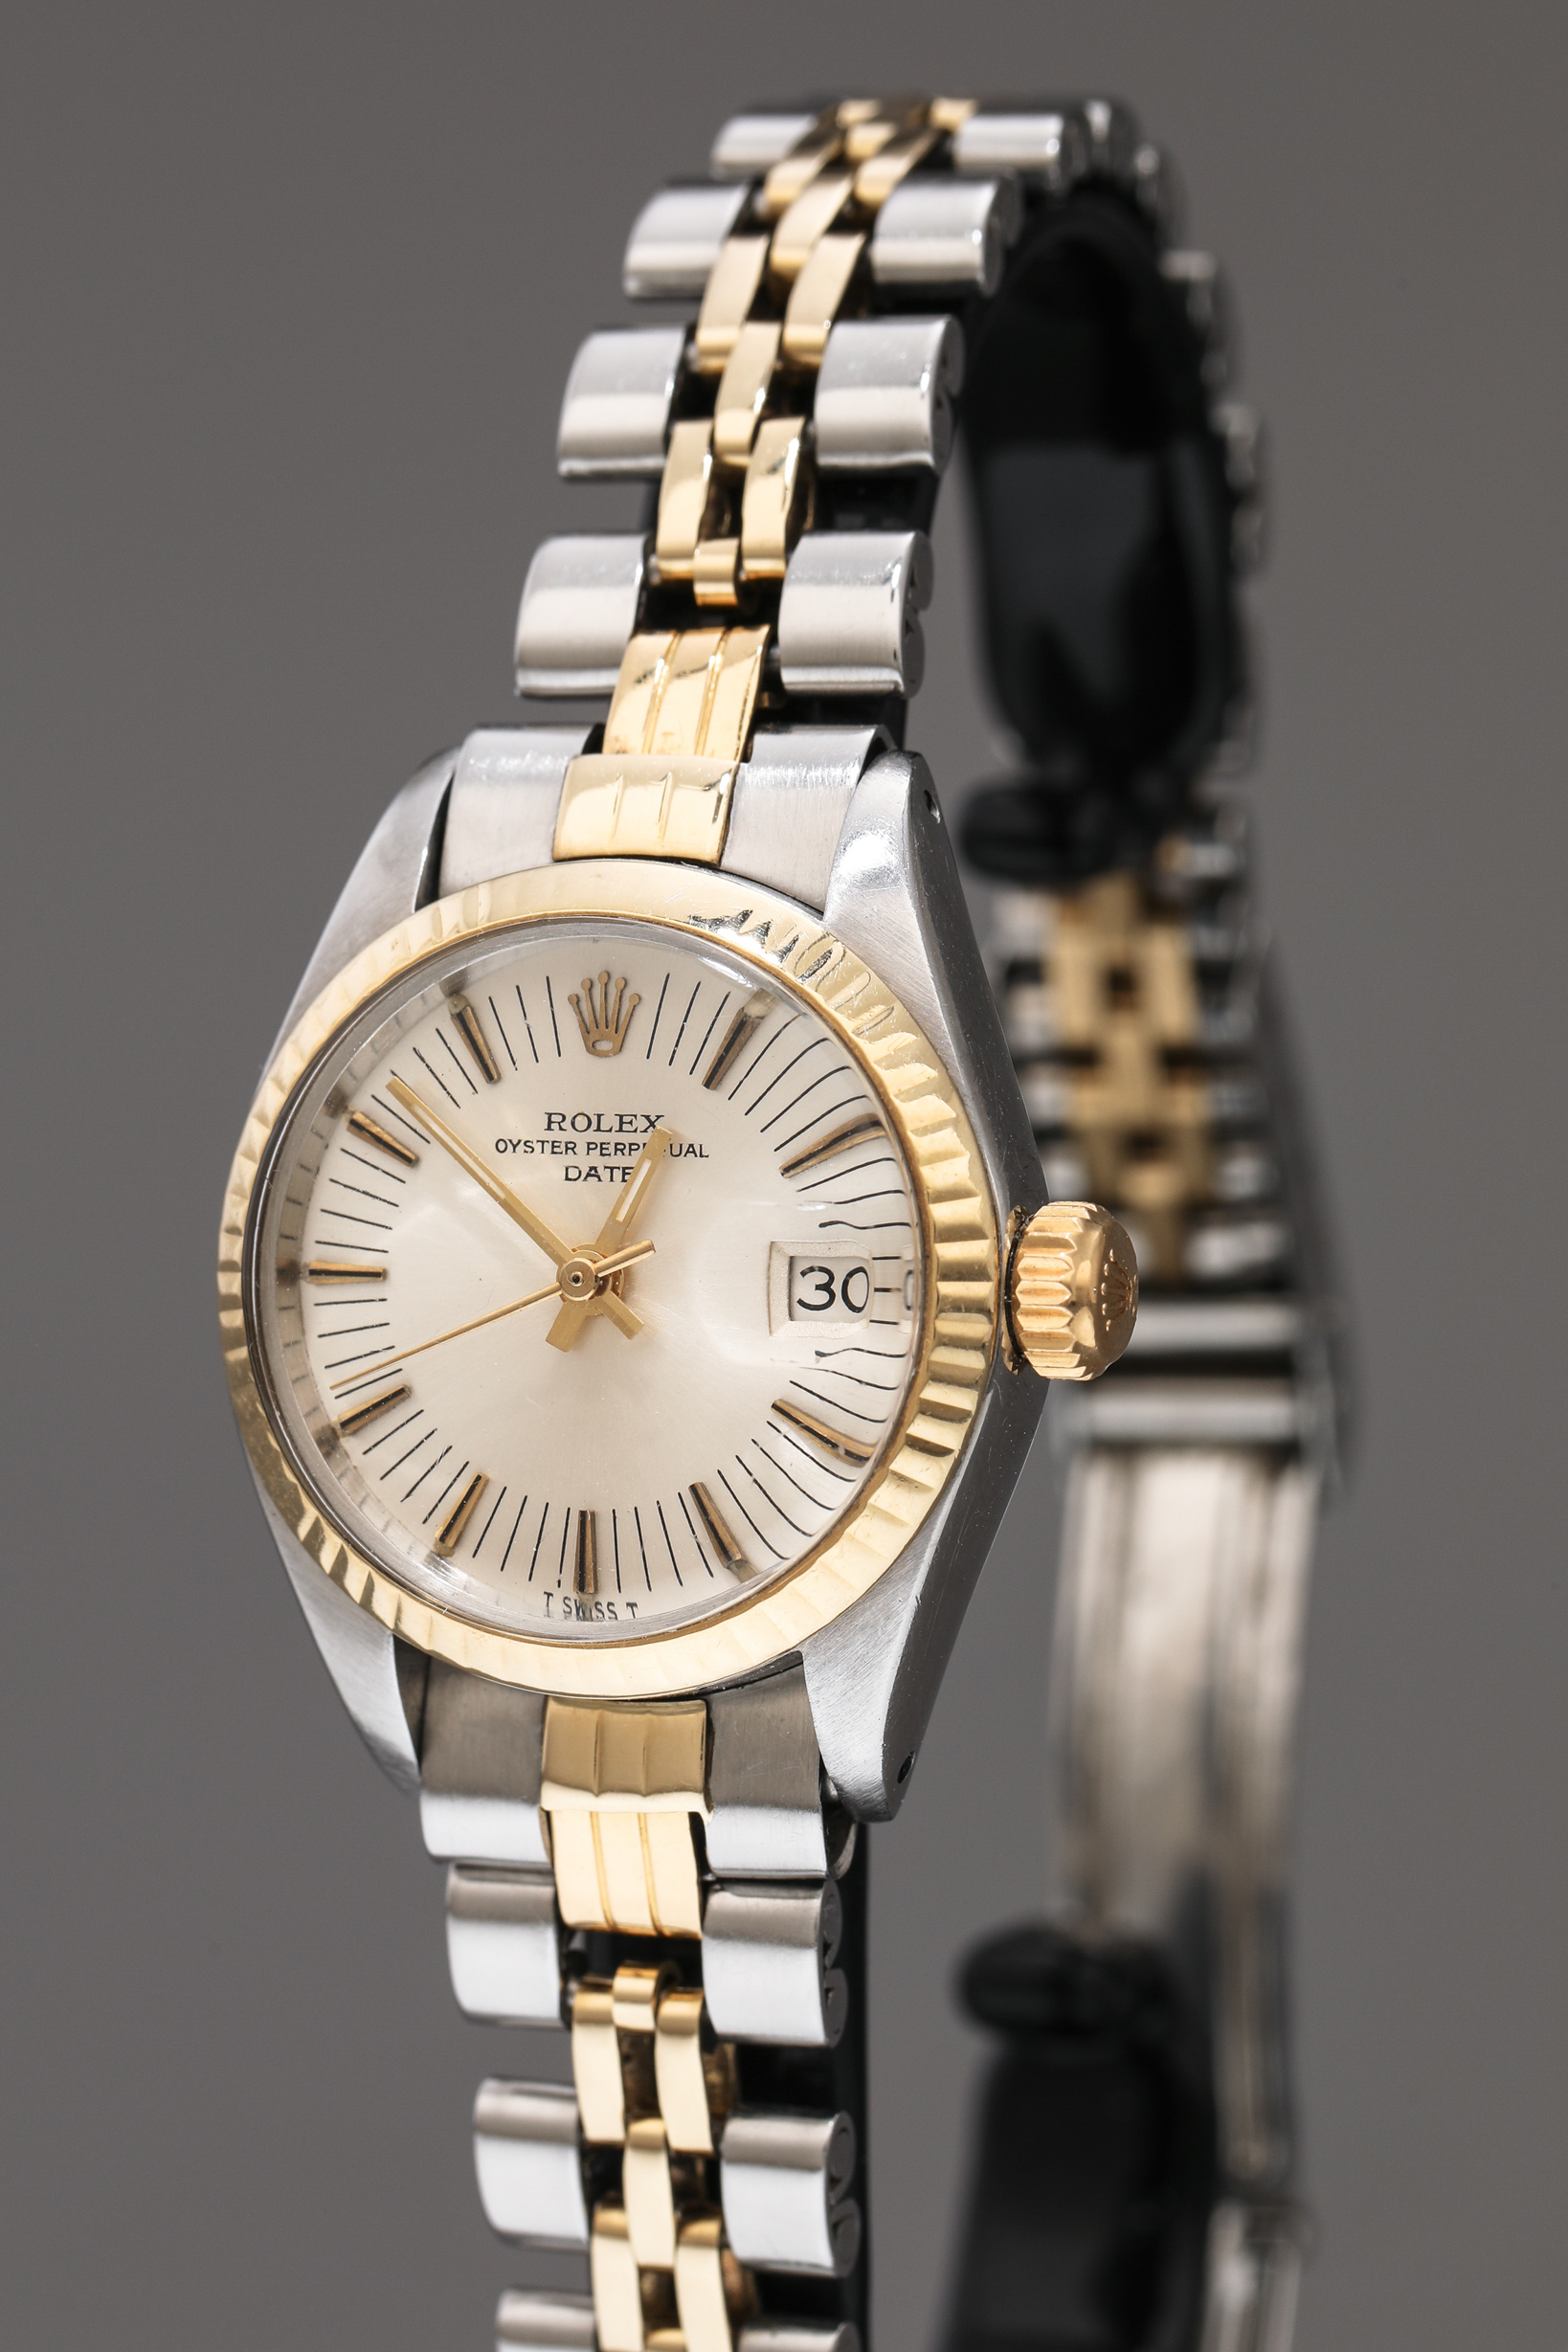 Rolex Oyster Perpetual Lady Date Ref. 6917. Automatic women's watch - Image 3 of 9